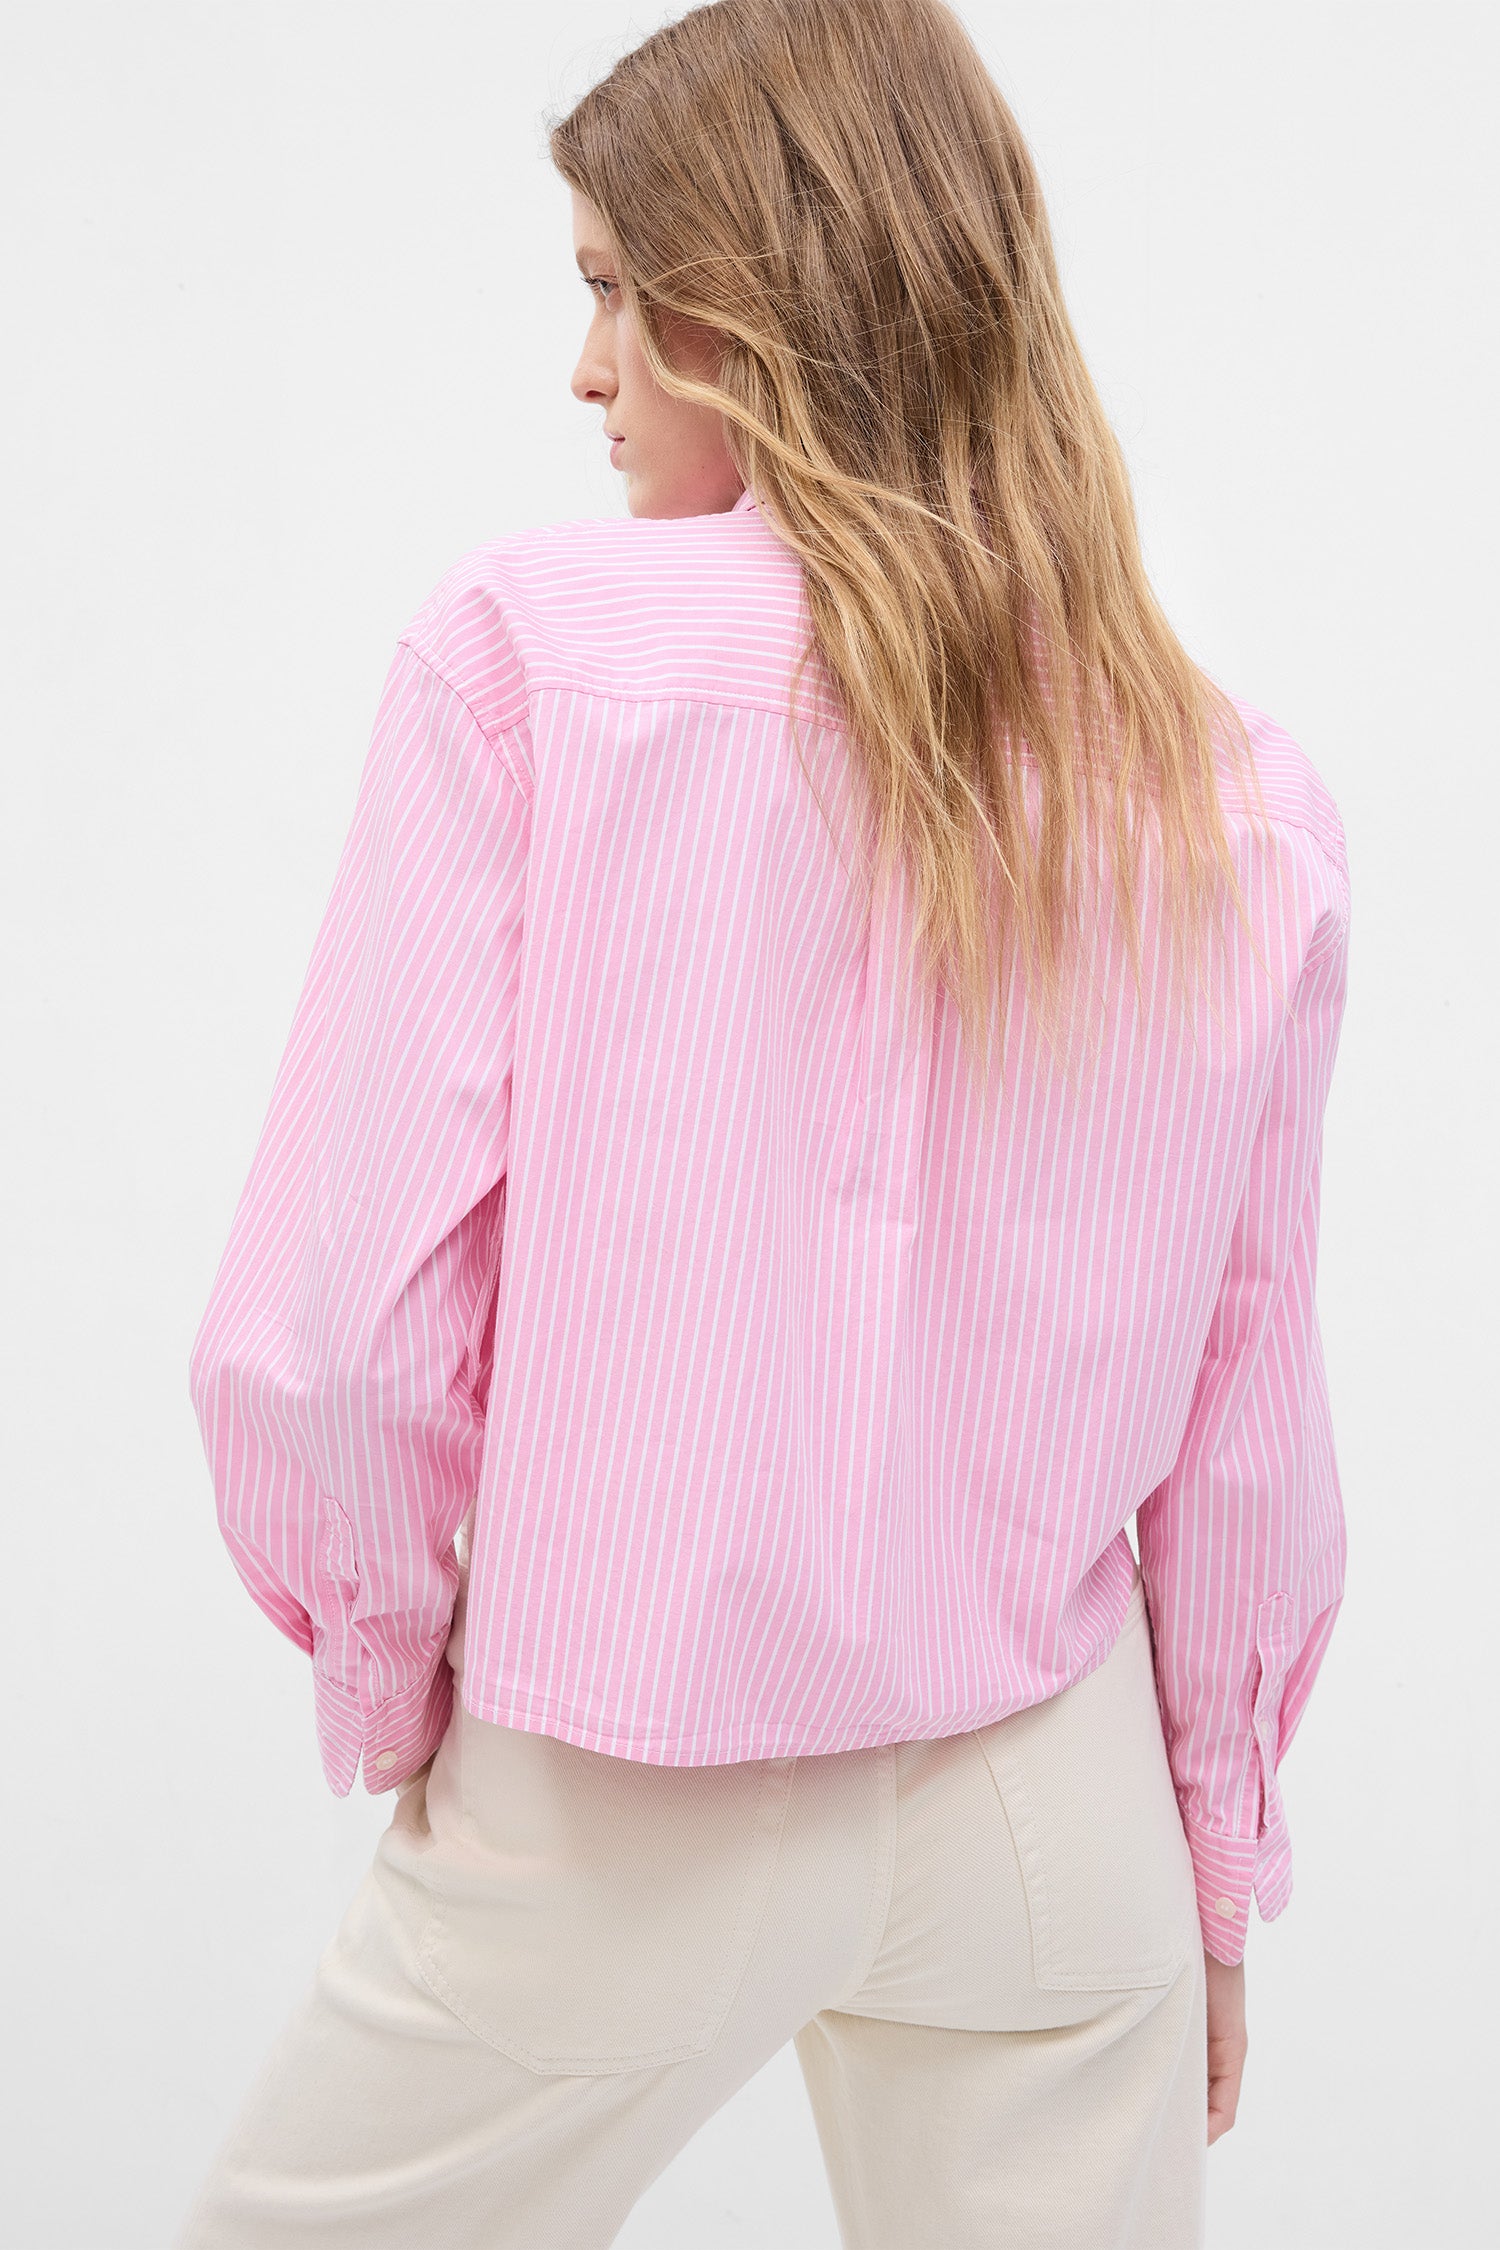 Back image of model wearing pink and white striped crop button up shirt with rosette detail on shoulder